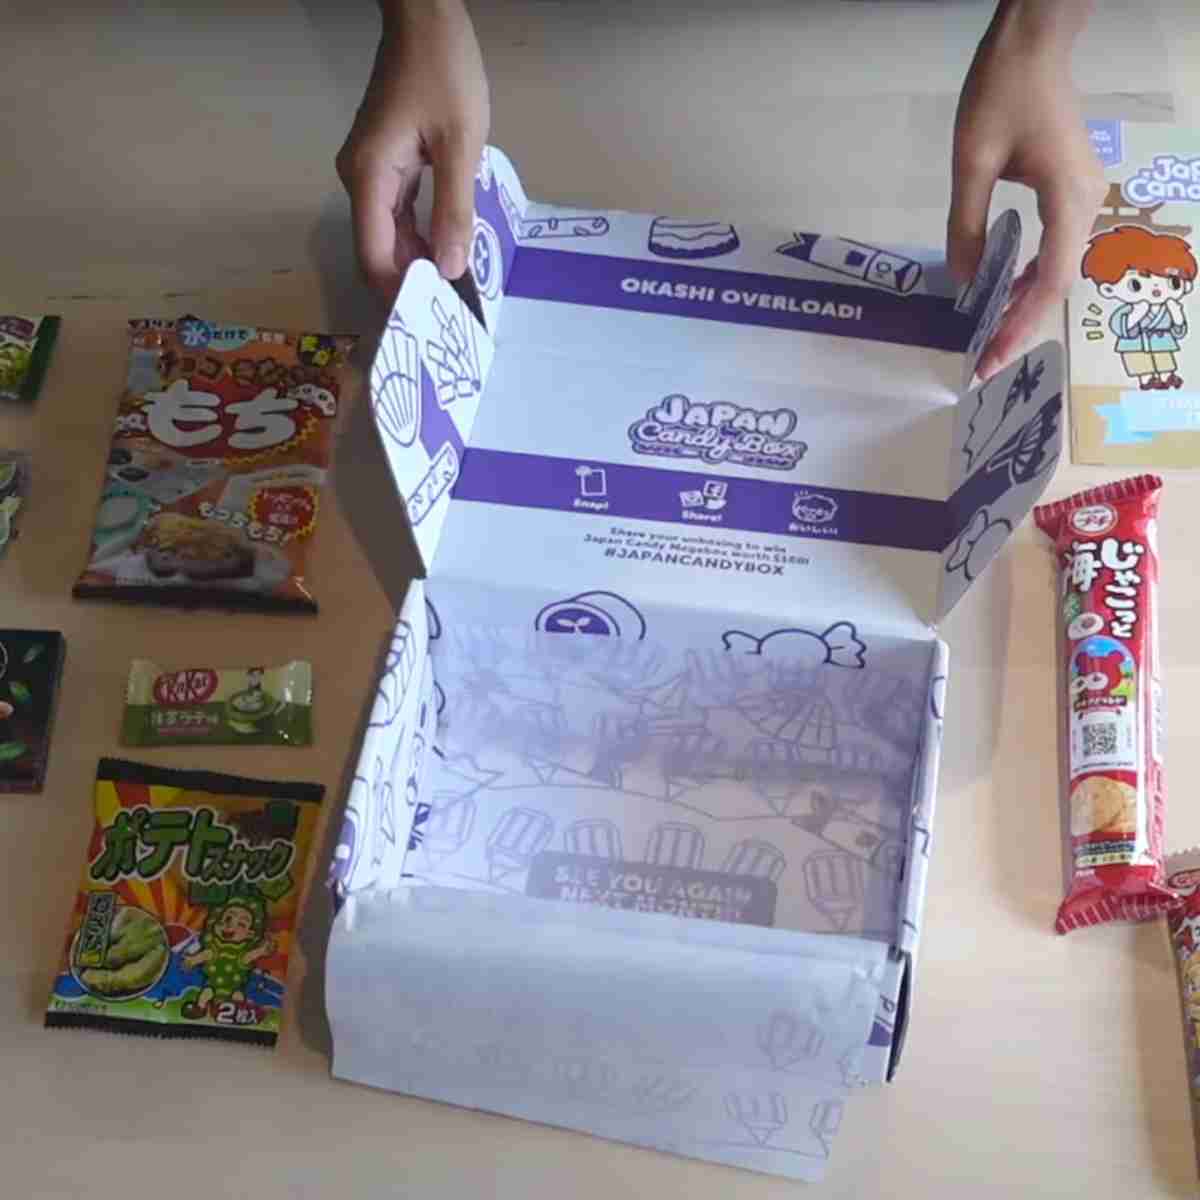 Japan candy box unboxed